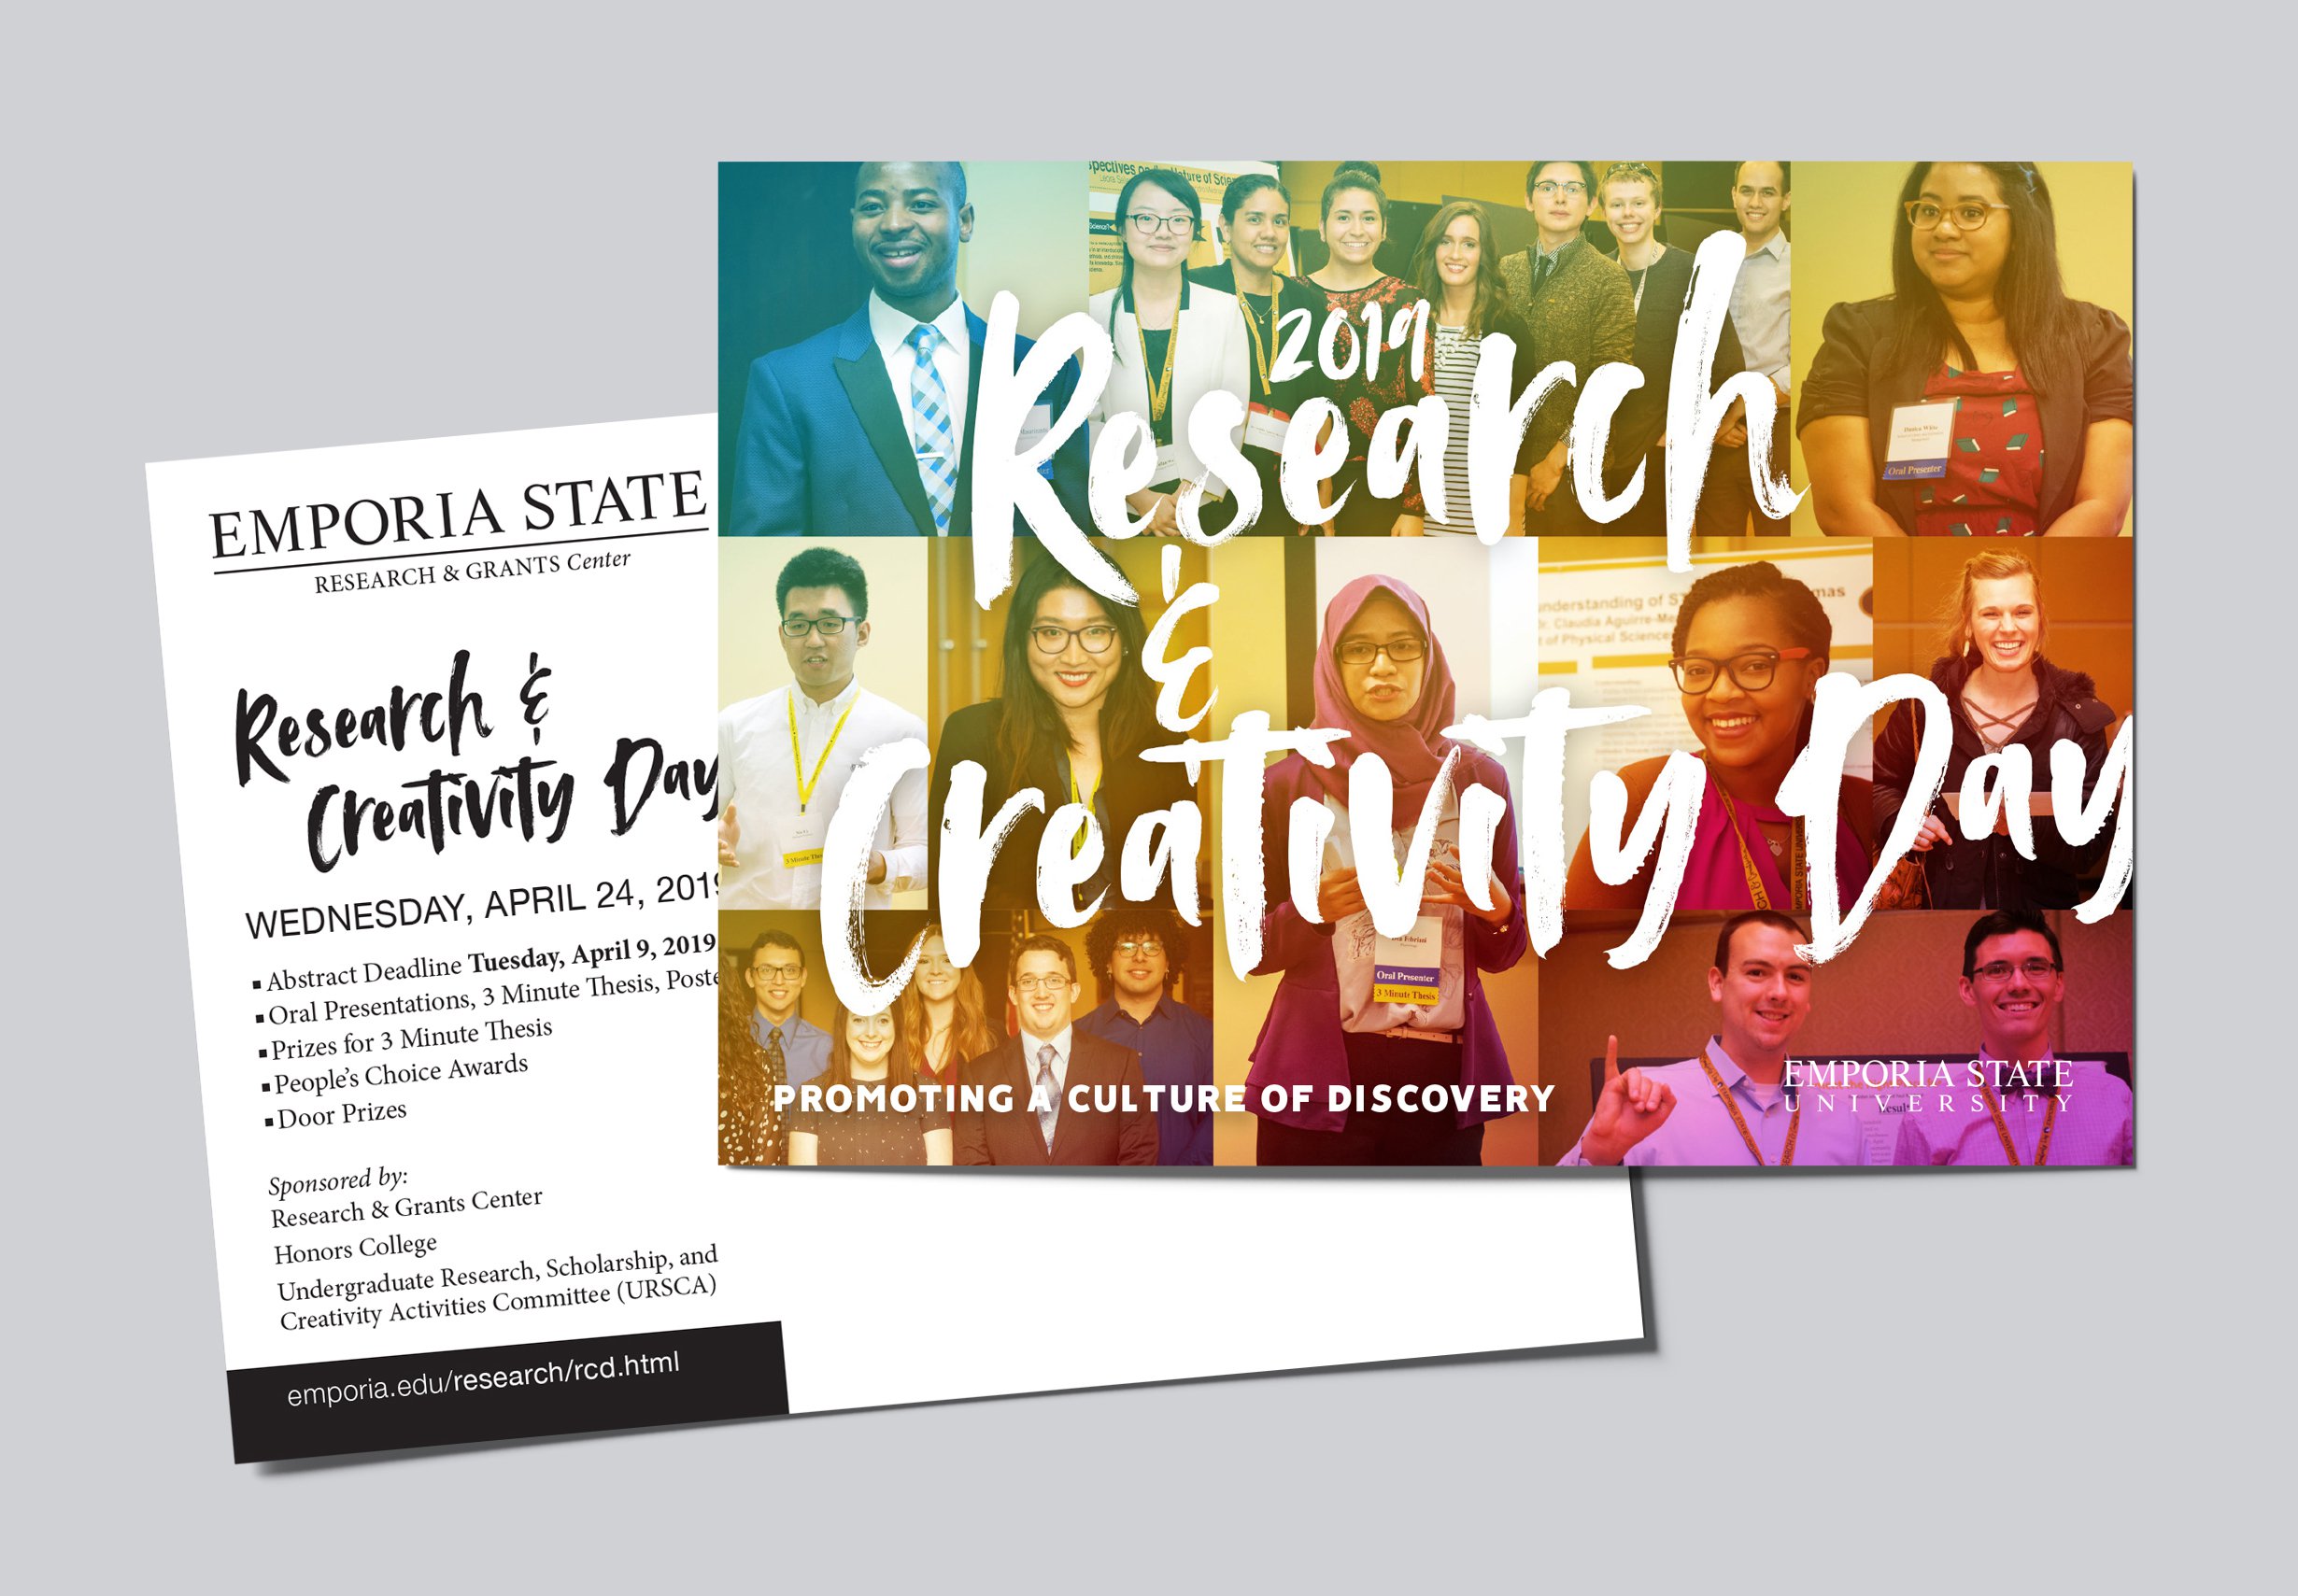 Research & Creativity day flyer printed by Emporia State University Copy Center